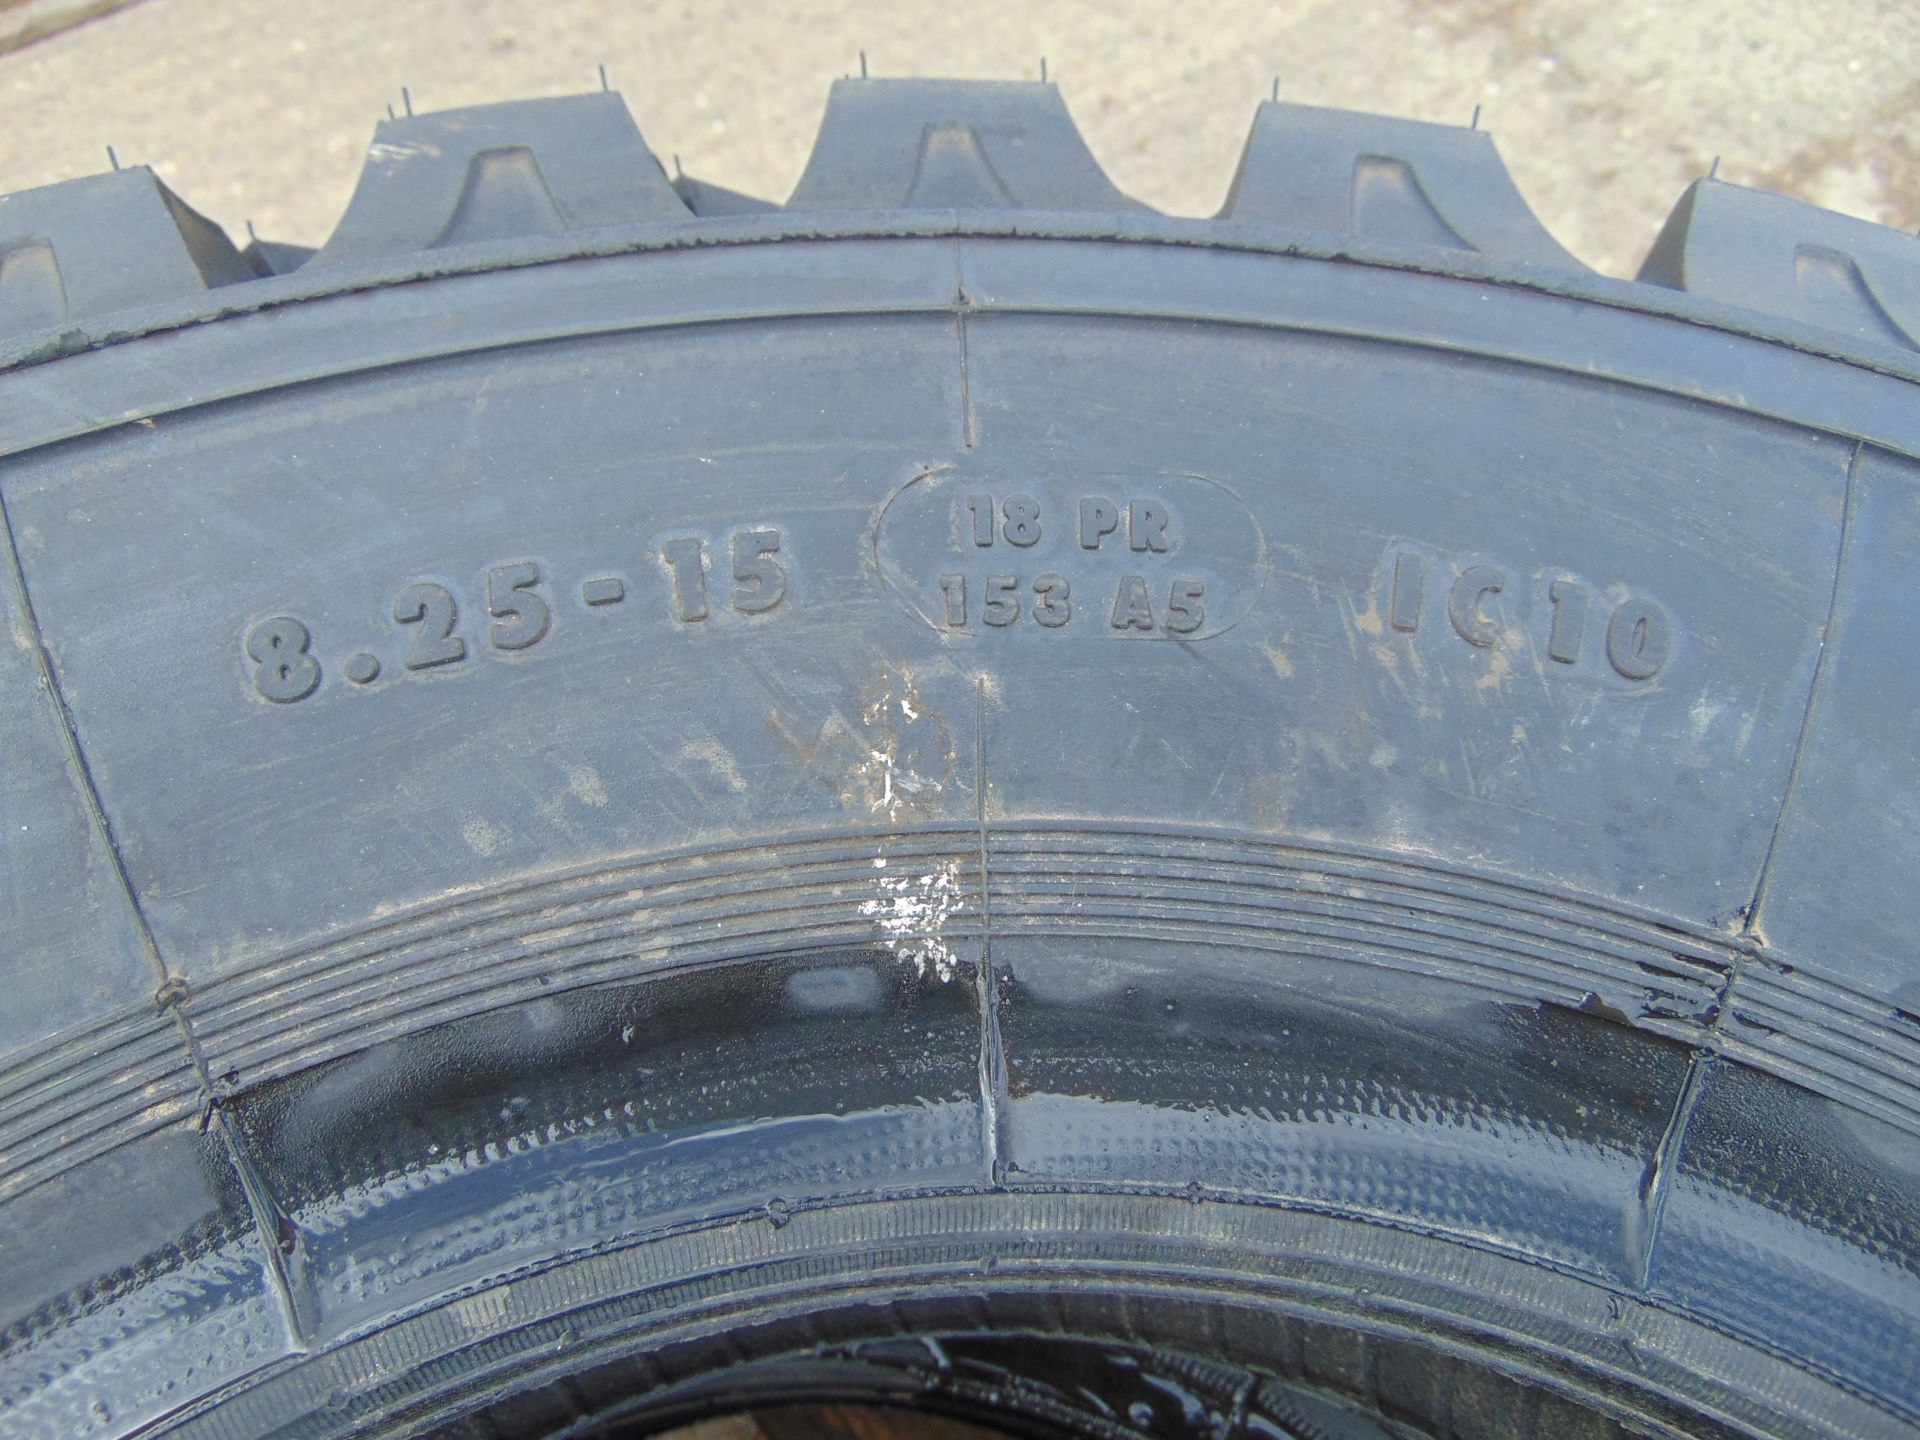 2 x Continental 8.25-15 Industrie Tyres - Image 3 of 6